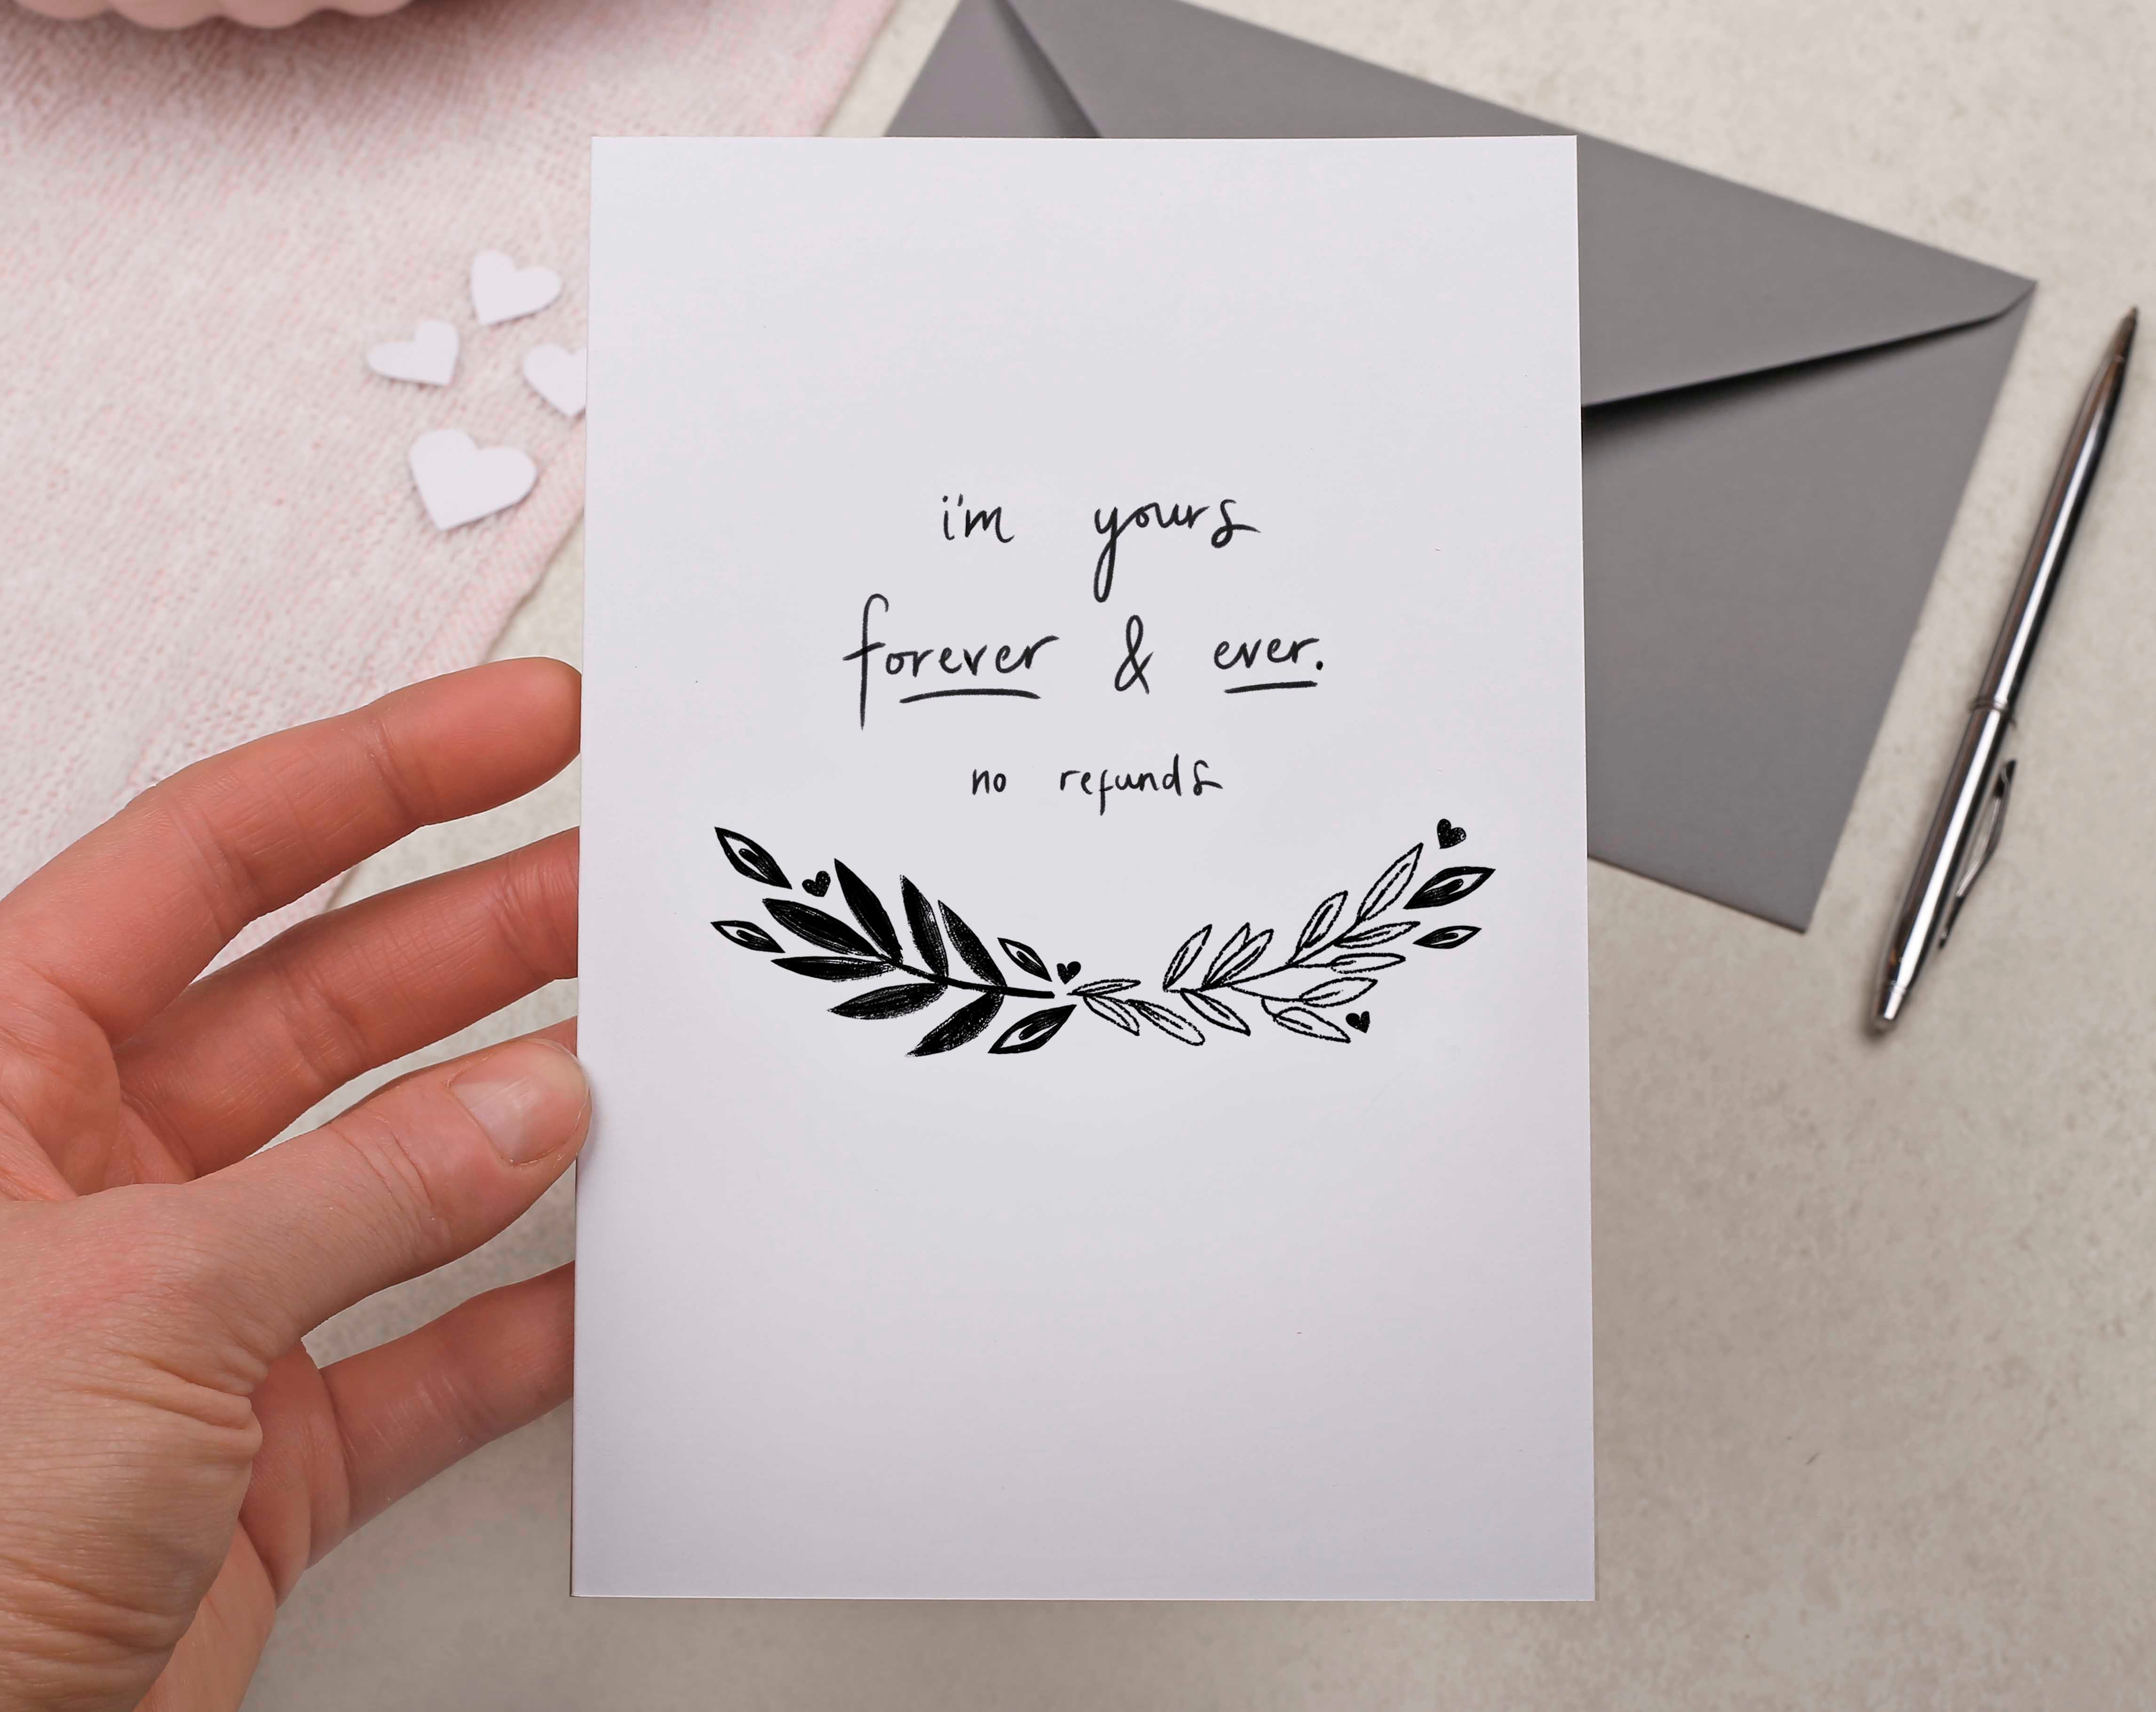 Funny 'I'm Yours Forever & Ever, No Refunds' Valentine card